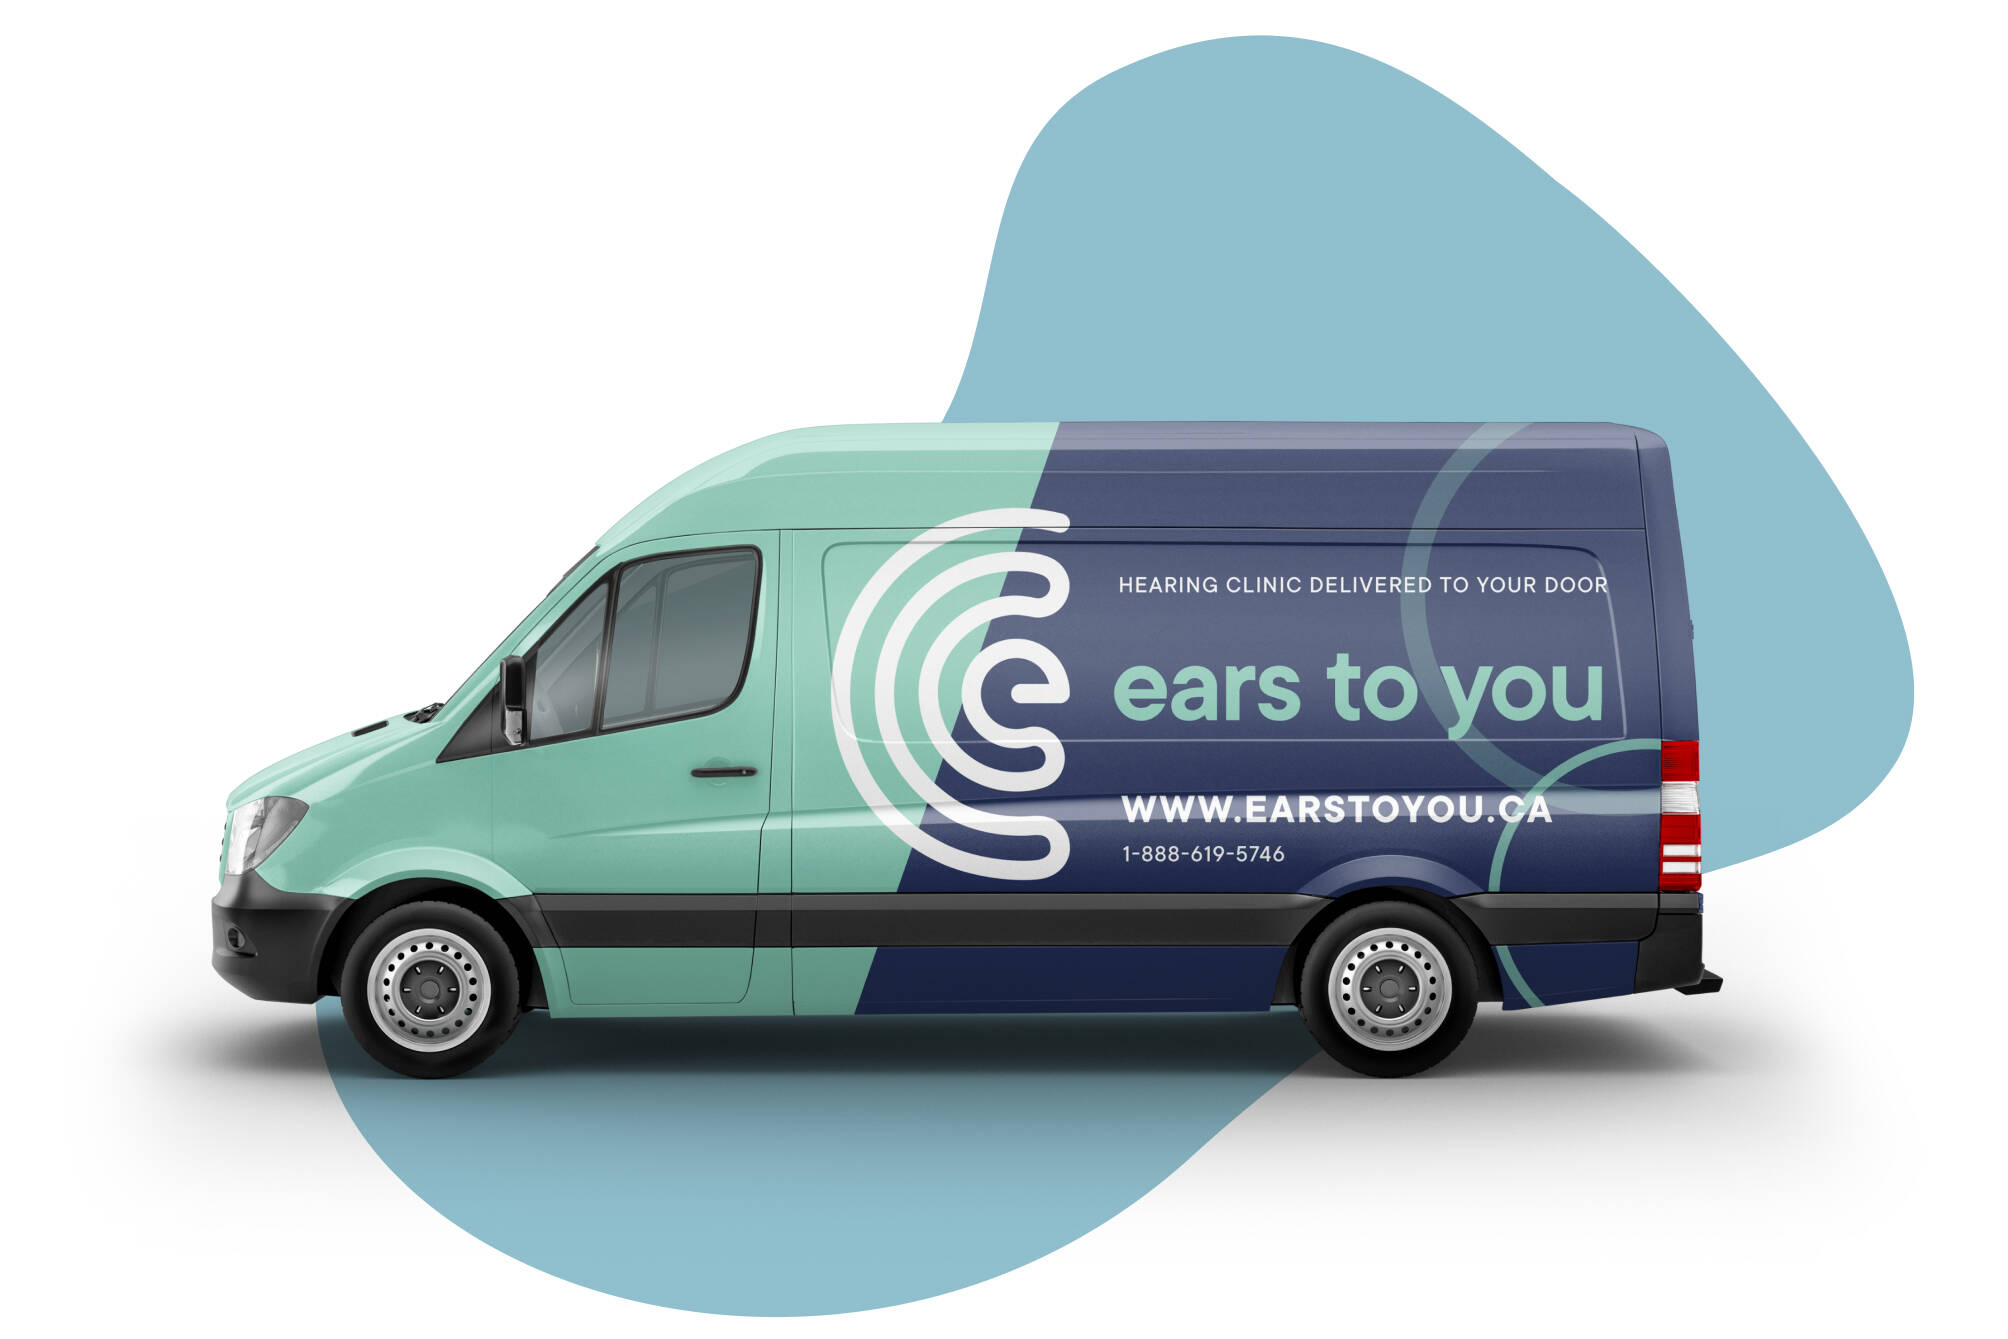 The Ears to You Mobile Hearing Clinic is a state-of-the art, fully equipped, mobile hearing unit, housed in a Sprinter van.